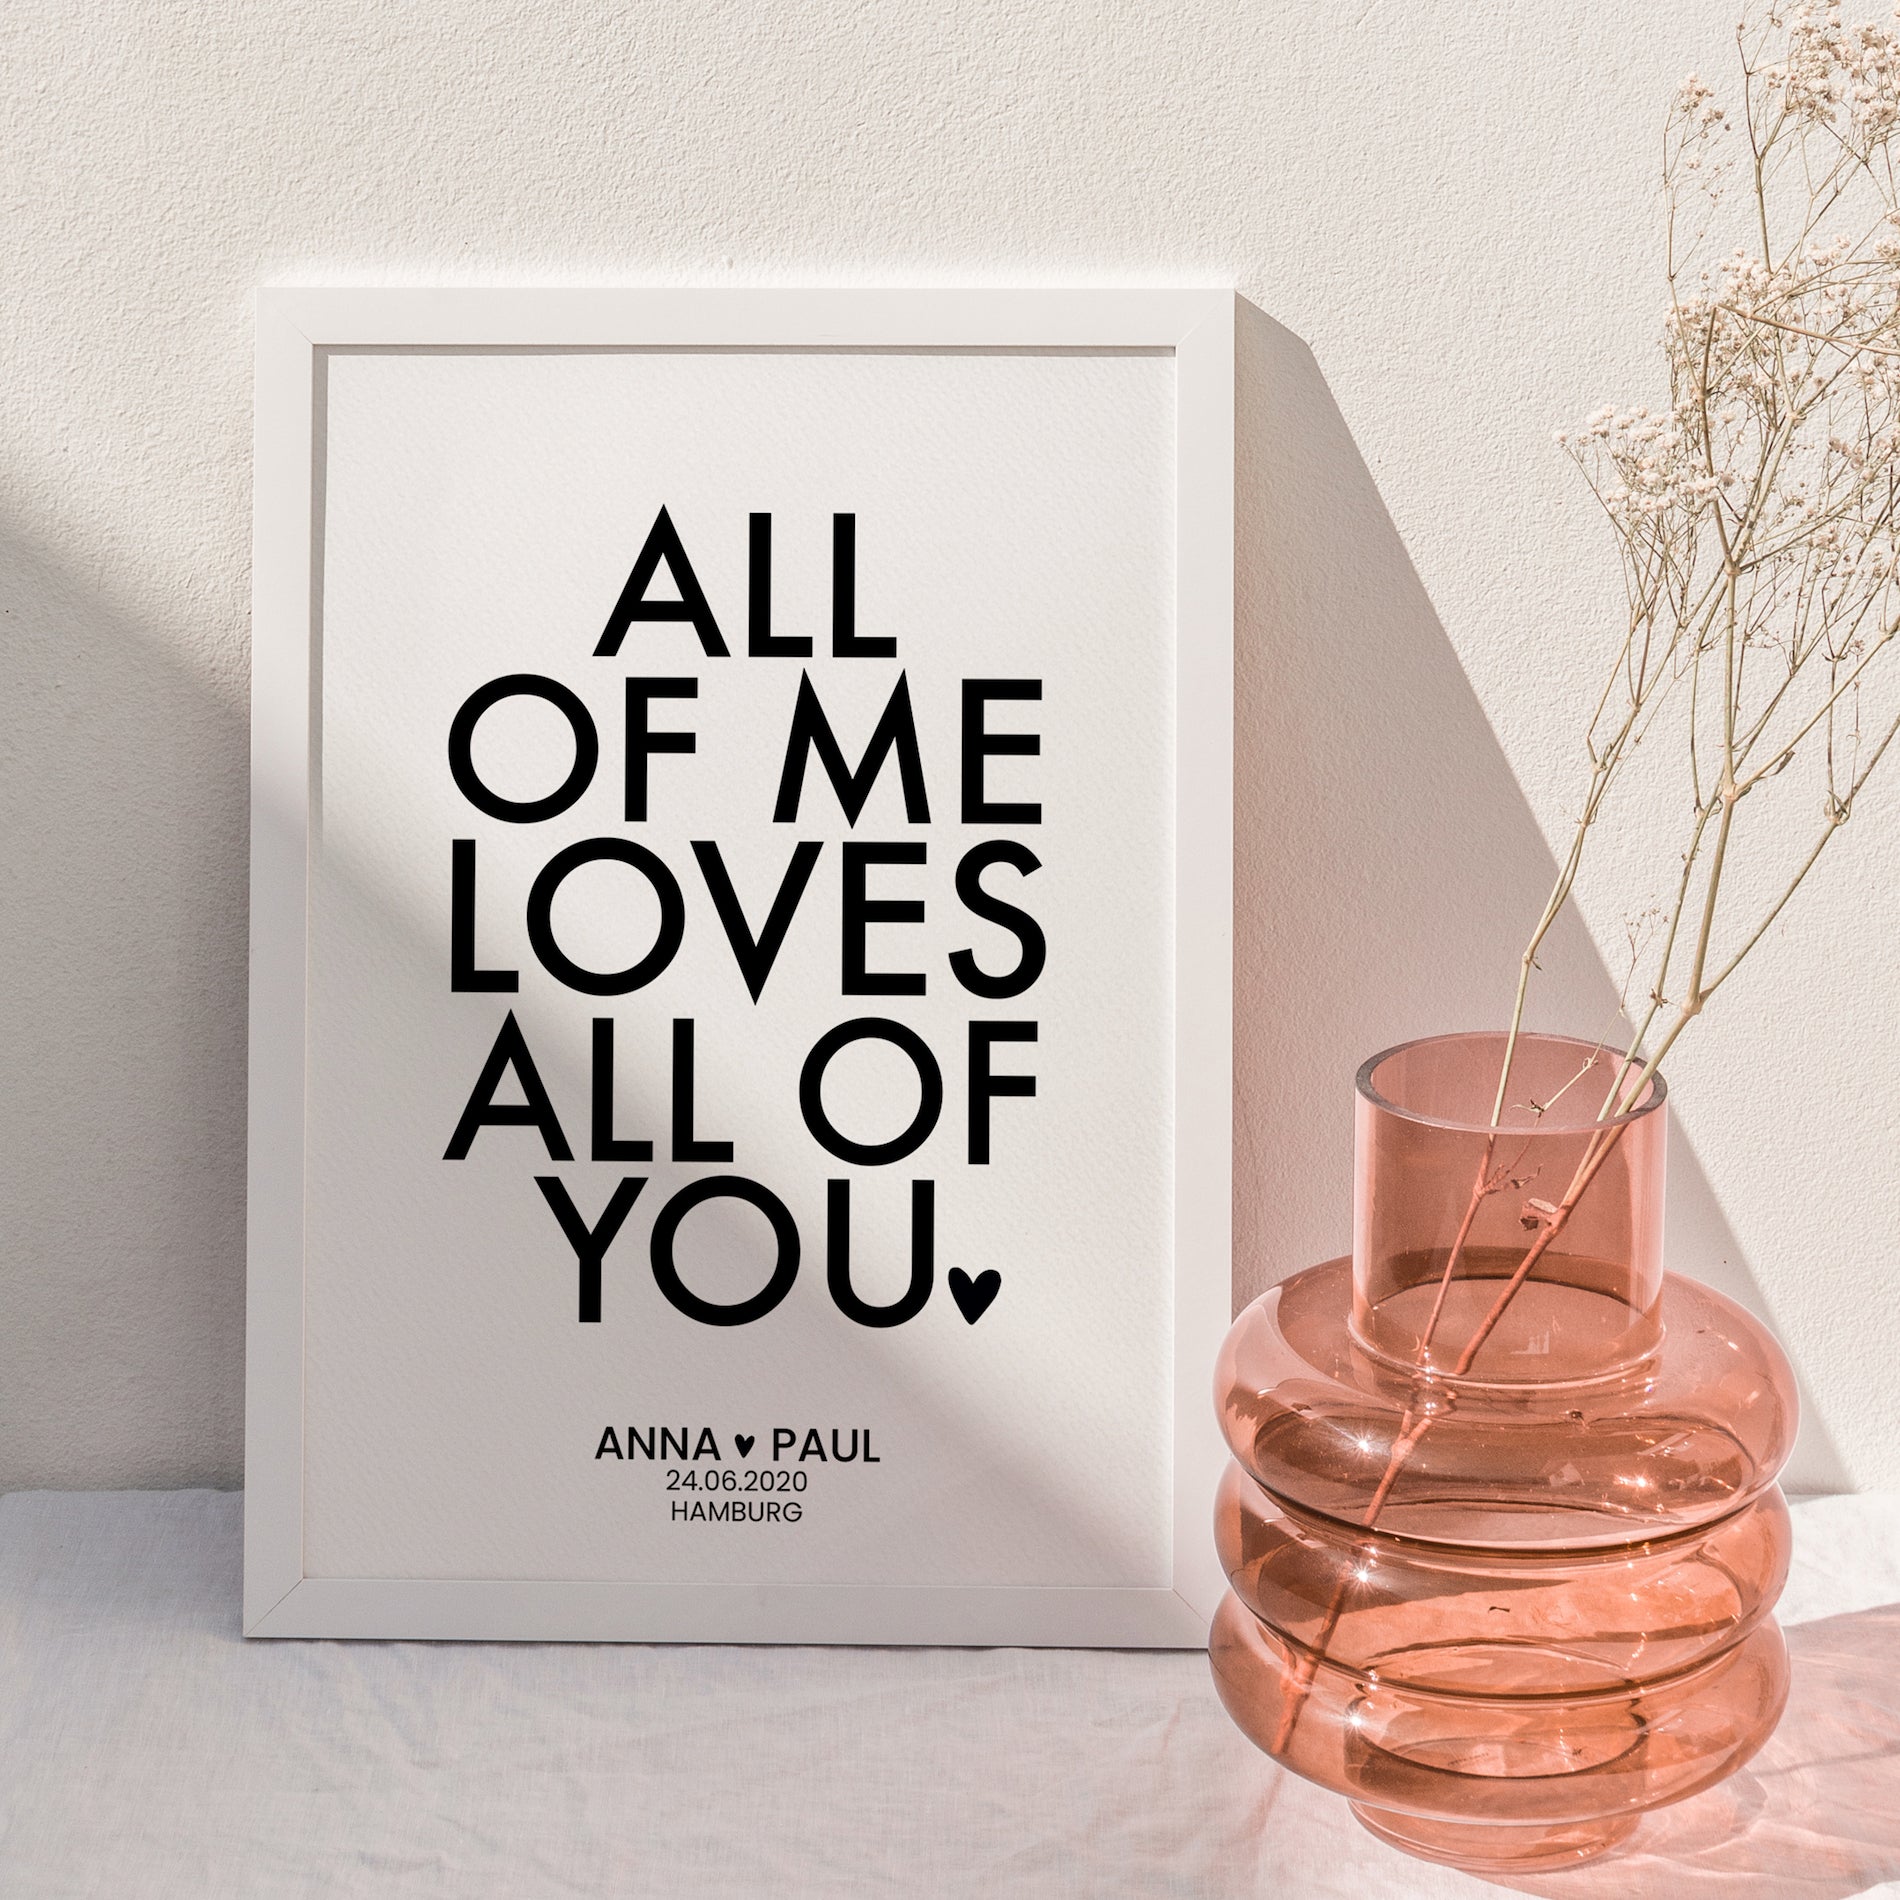 All of me loves all of you - Poster - No. 1